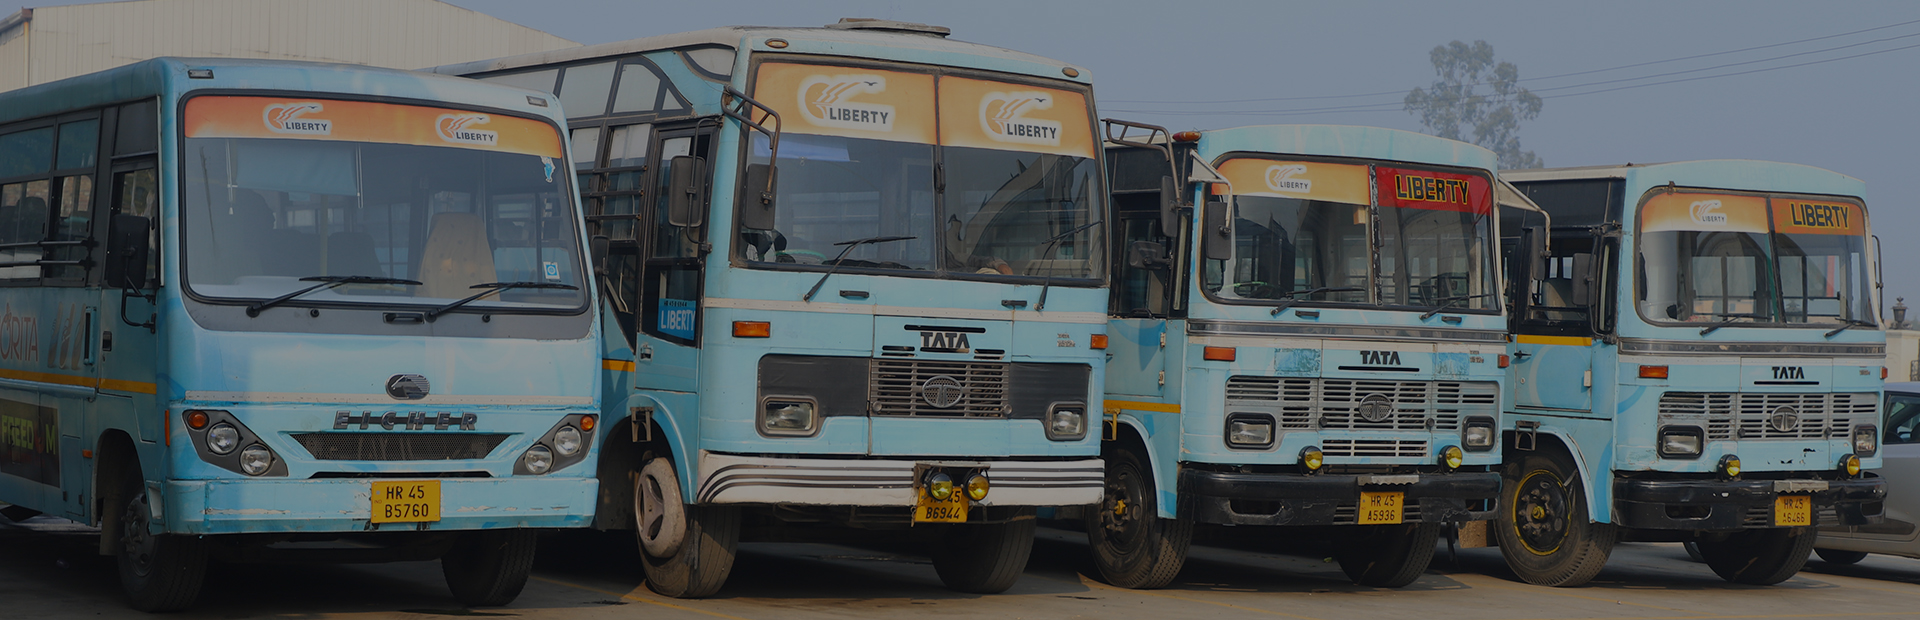 Liberty Safety Shoes Buses